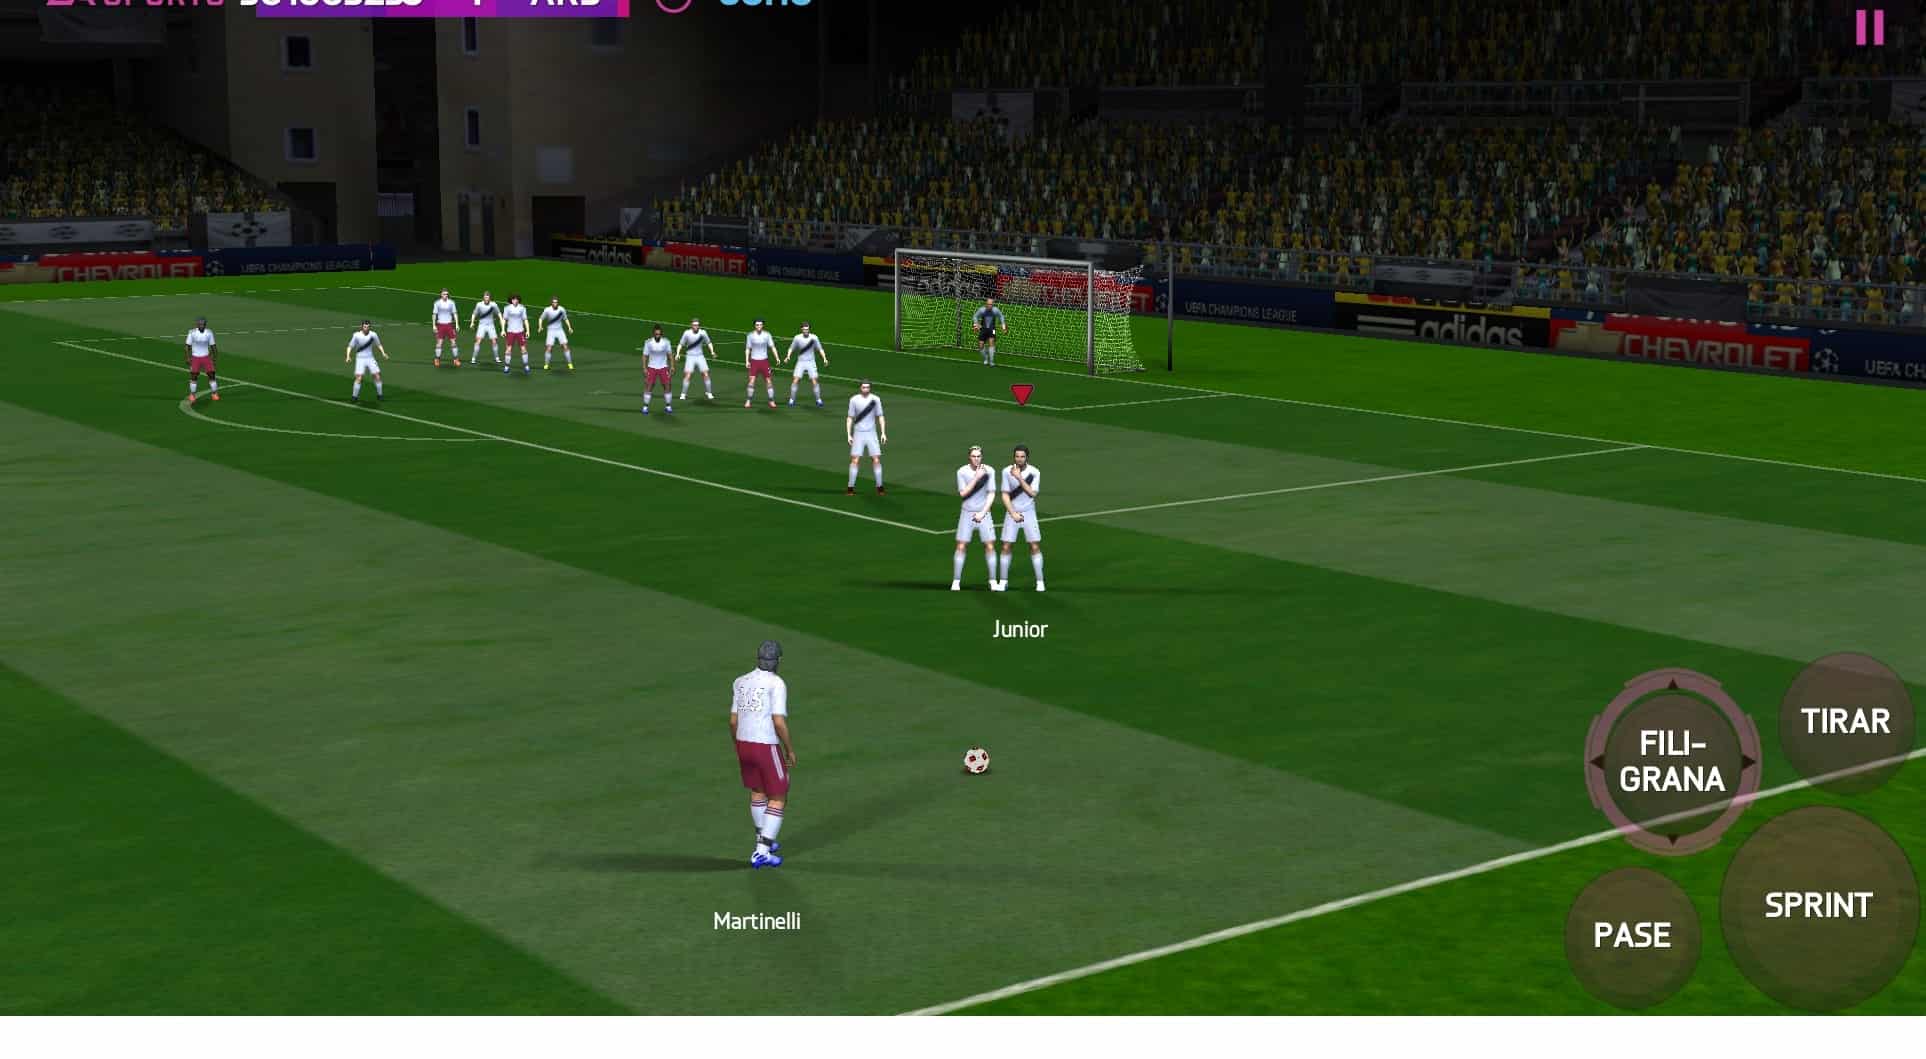 FIFA 21 for Android is not official, beware of online APK and OBB files